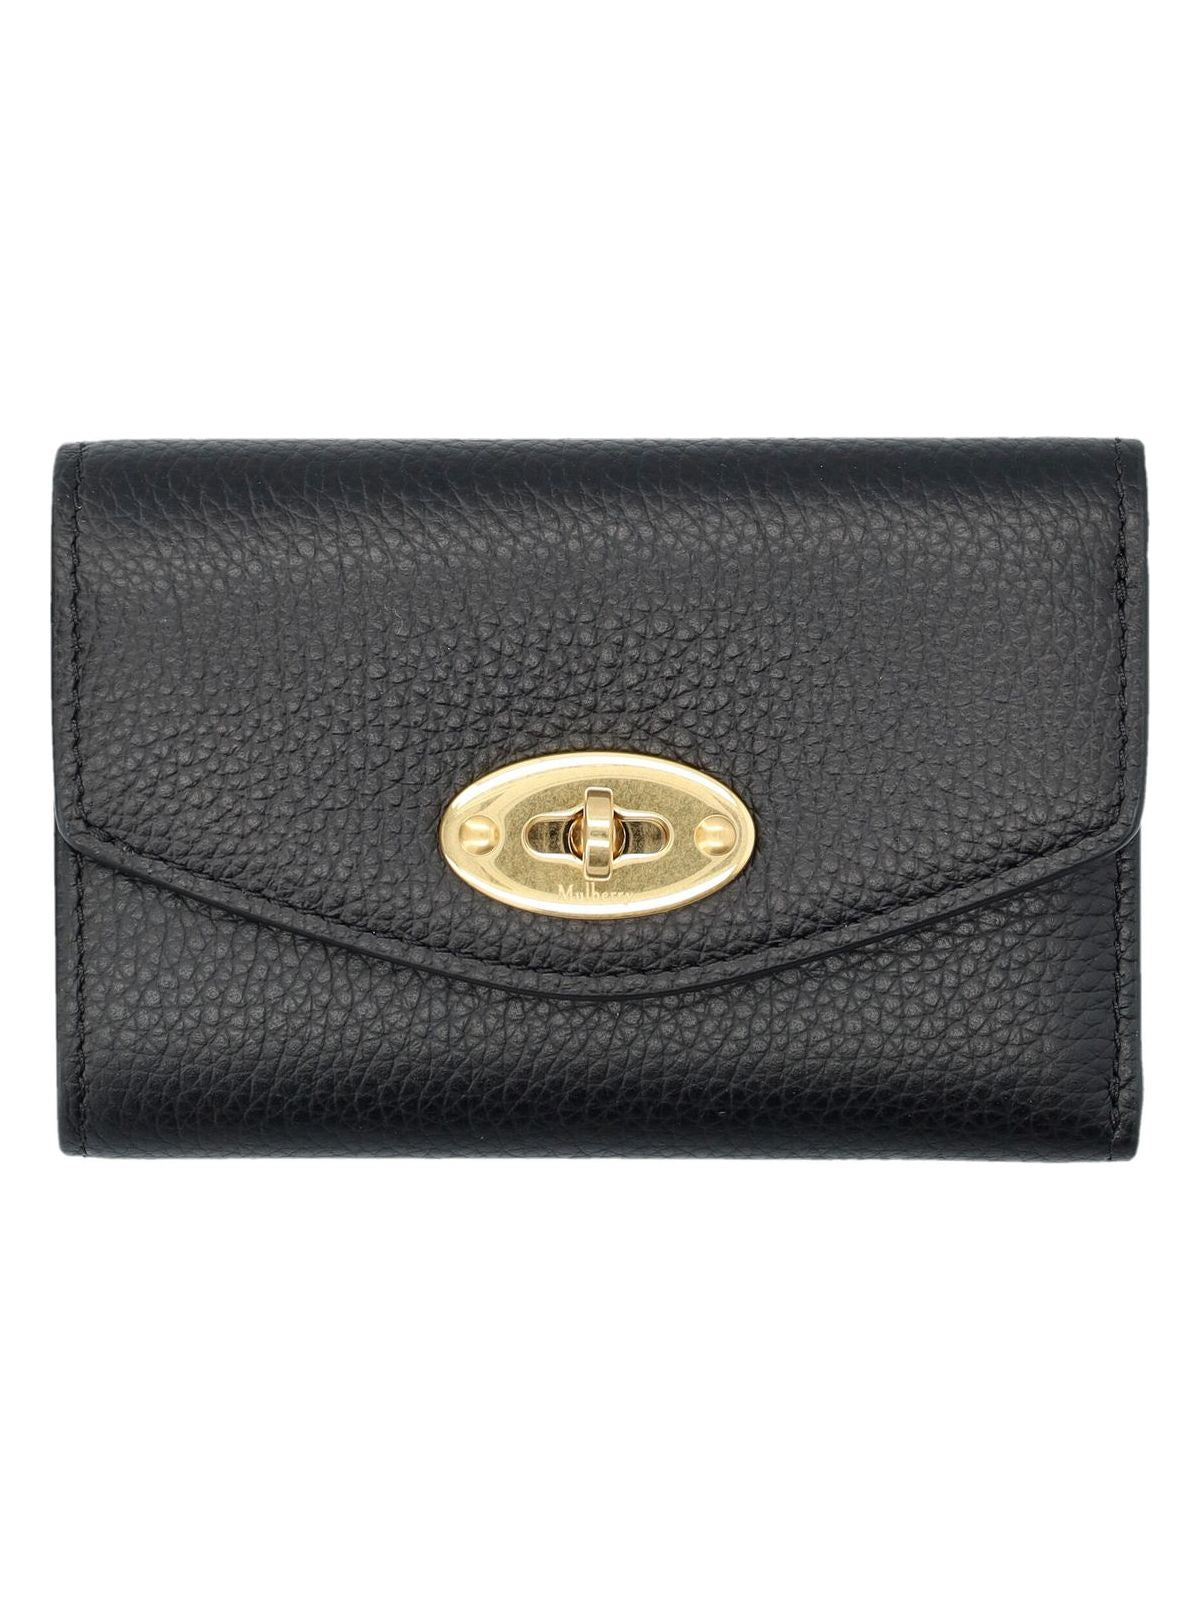 A100 MULBERRY DARLEY FOLDED MULTI-CARD WALLET